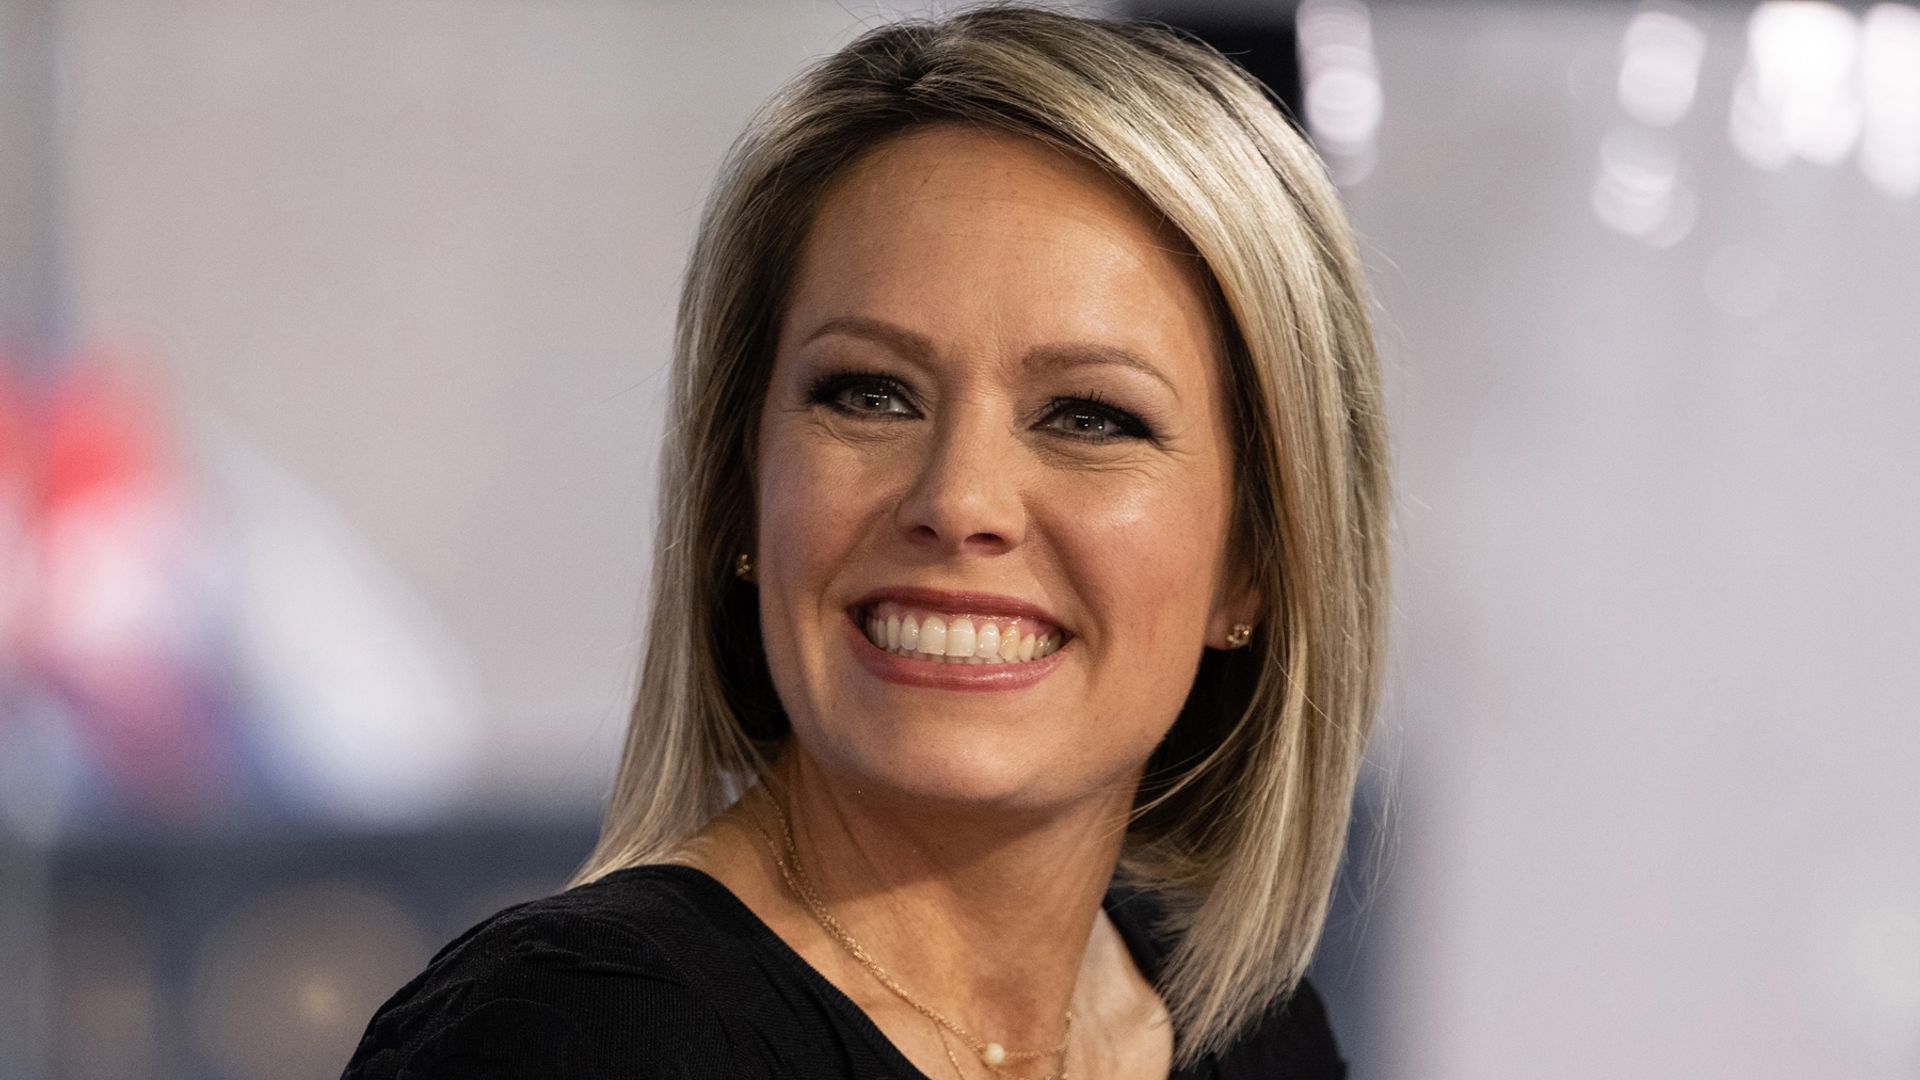 Dylan Dreyer's secret time away revealed on Today Show - and it